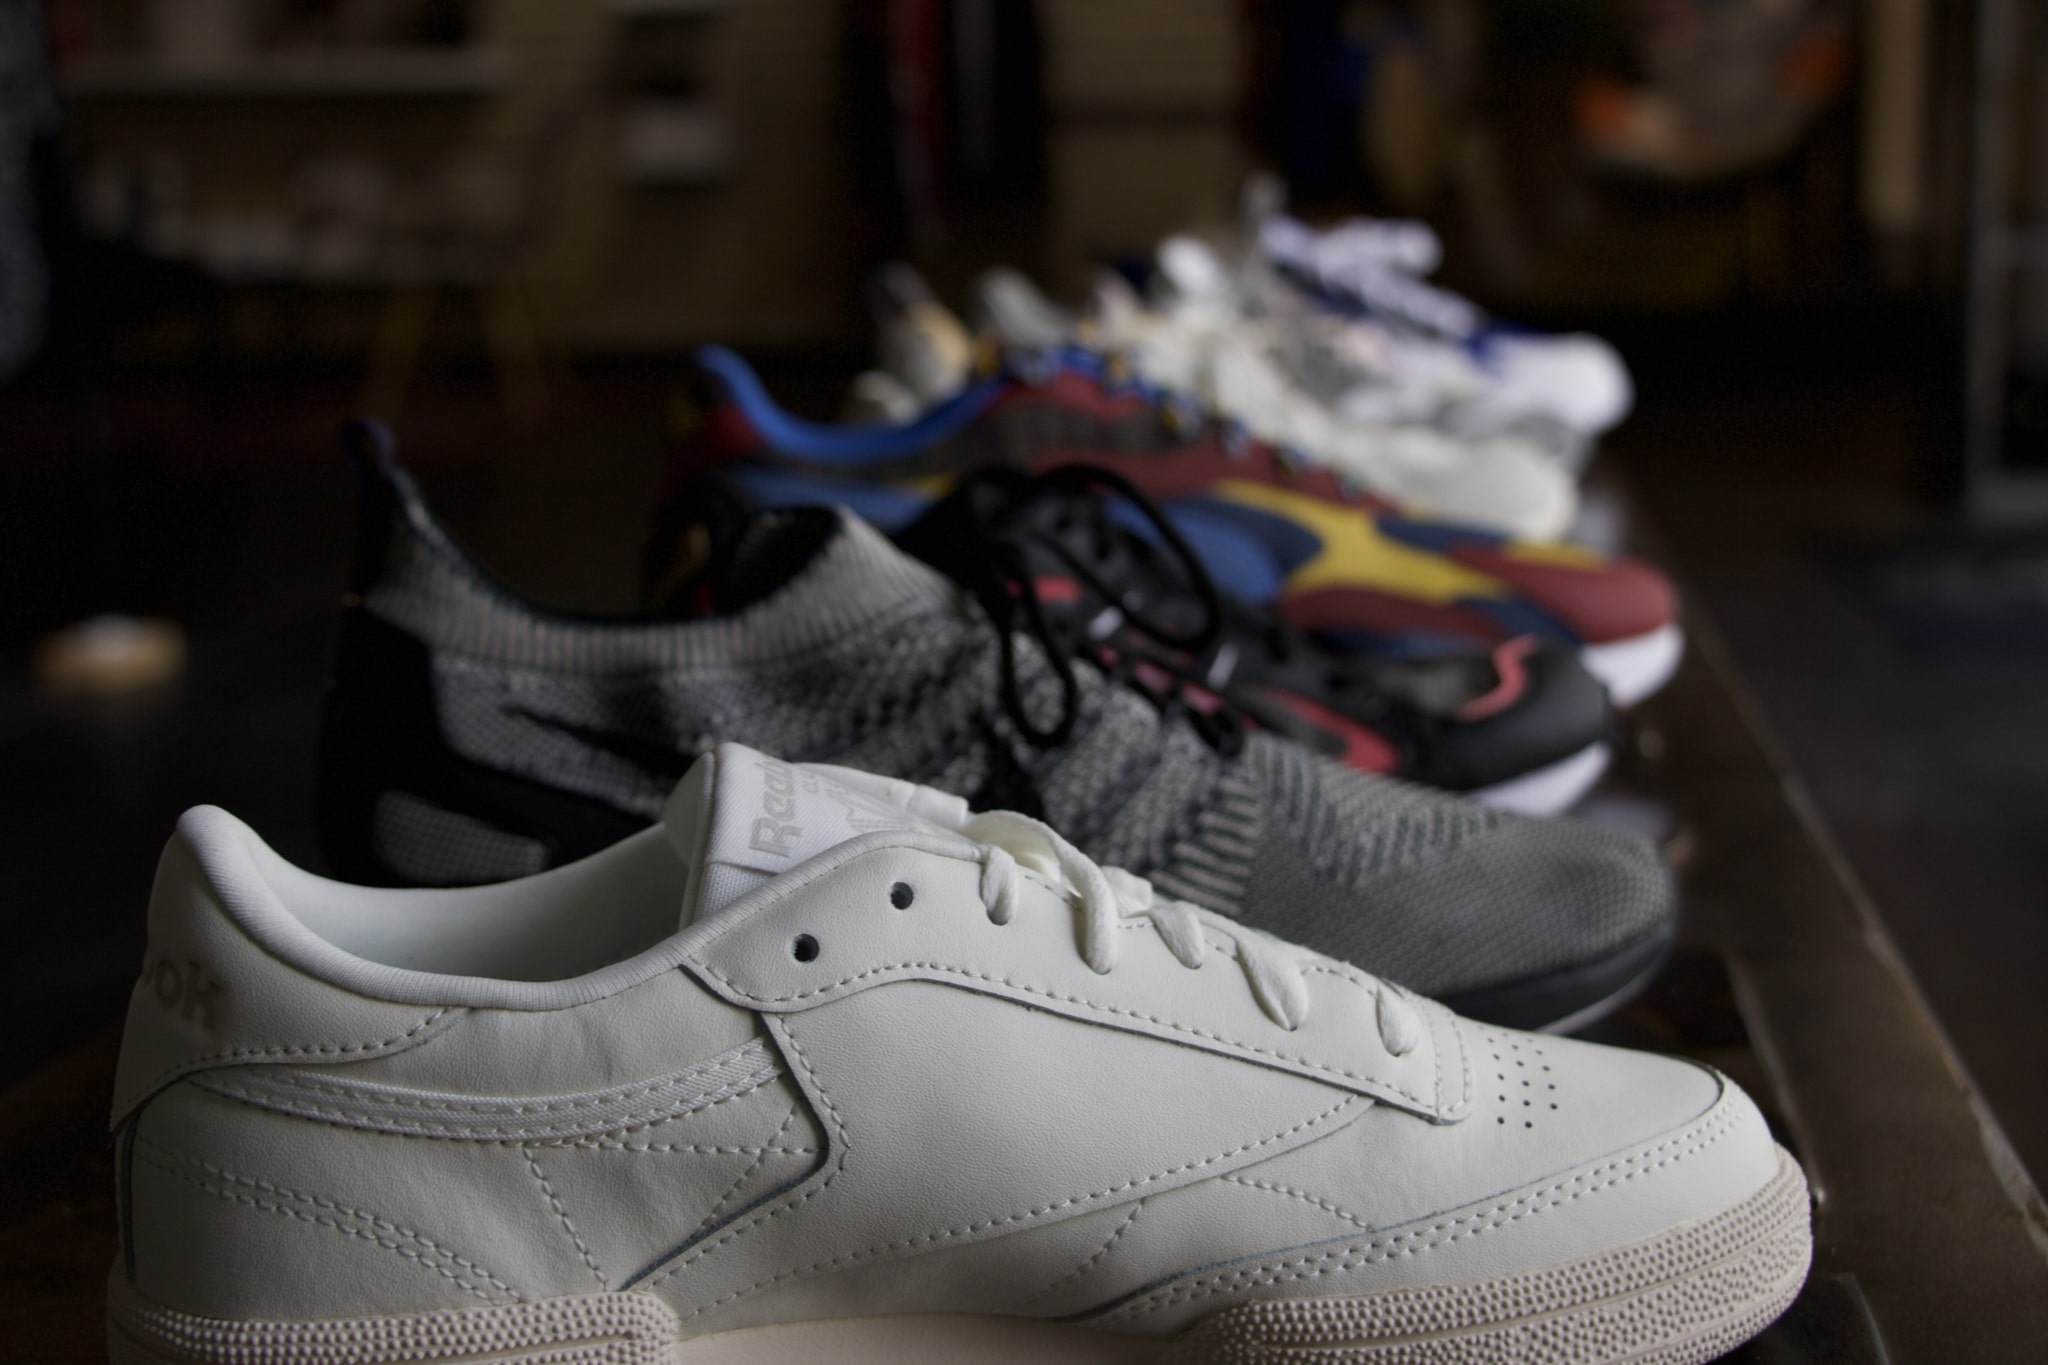 IMG 1738 scaled A look at the sneaker trend + 7 local spots to get a dope pair